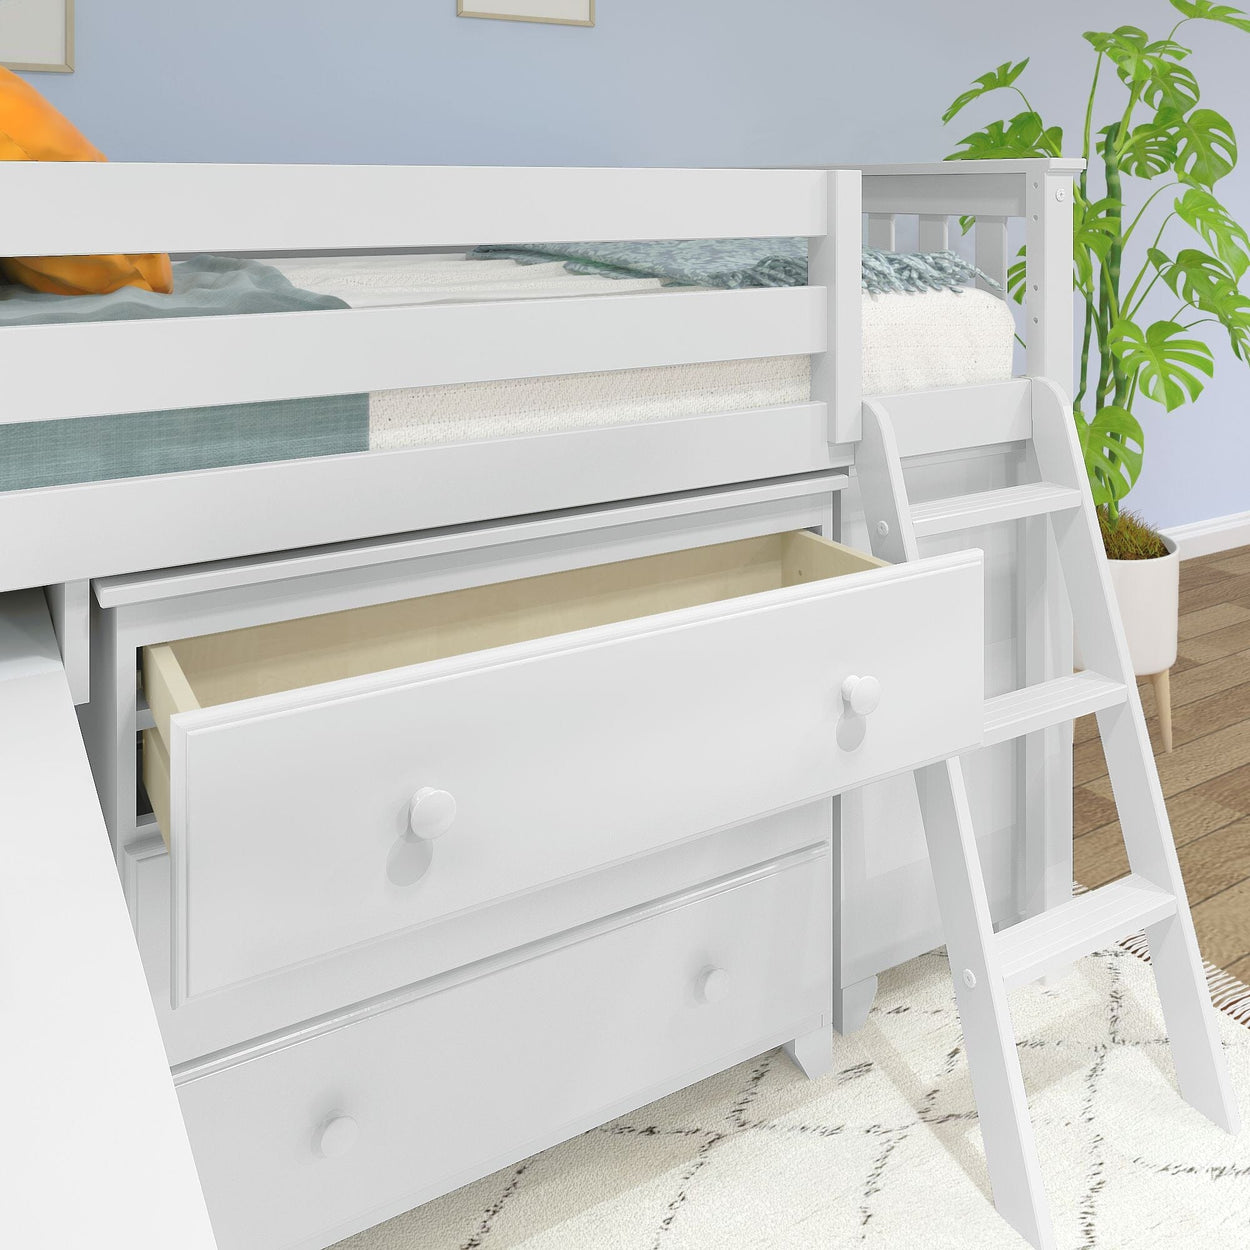 18-3D3DDK-002 : Loft Beds Twin-Size Low Loft with Pull-Out Desk and 3-Drawer Dressers, White